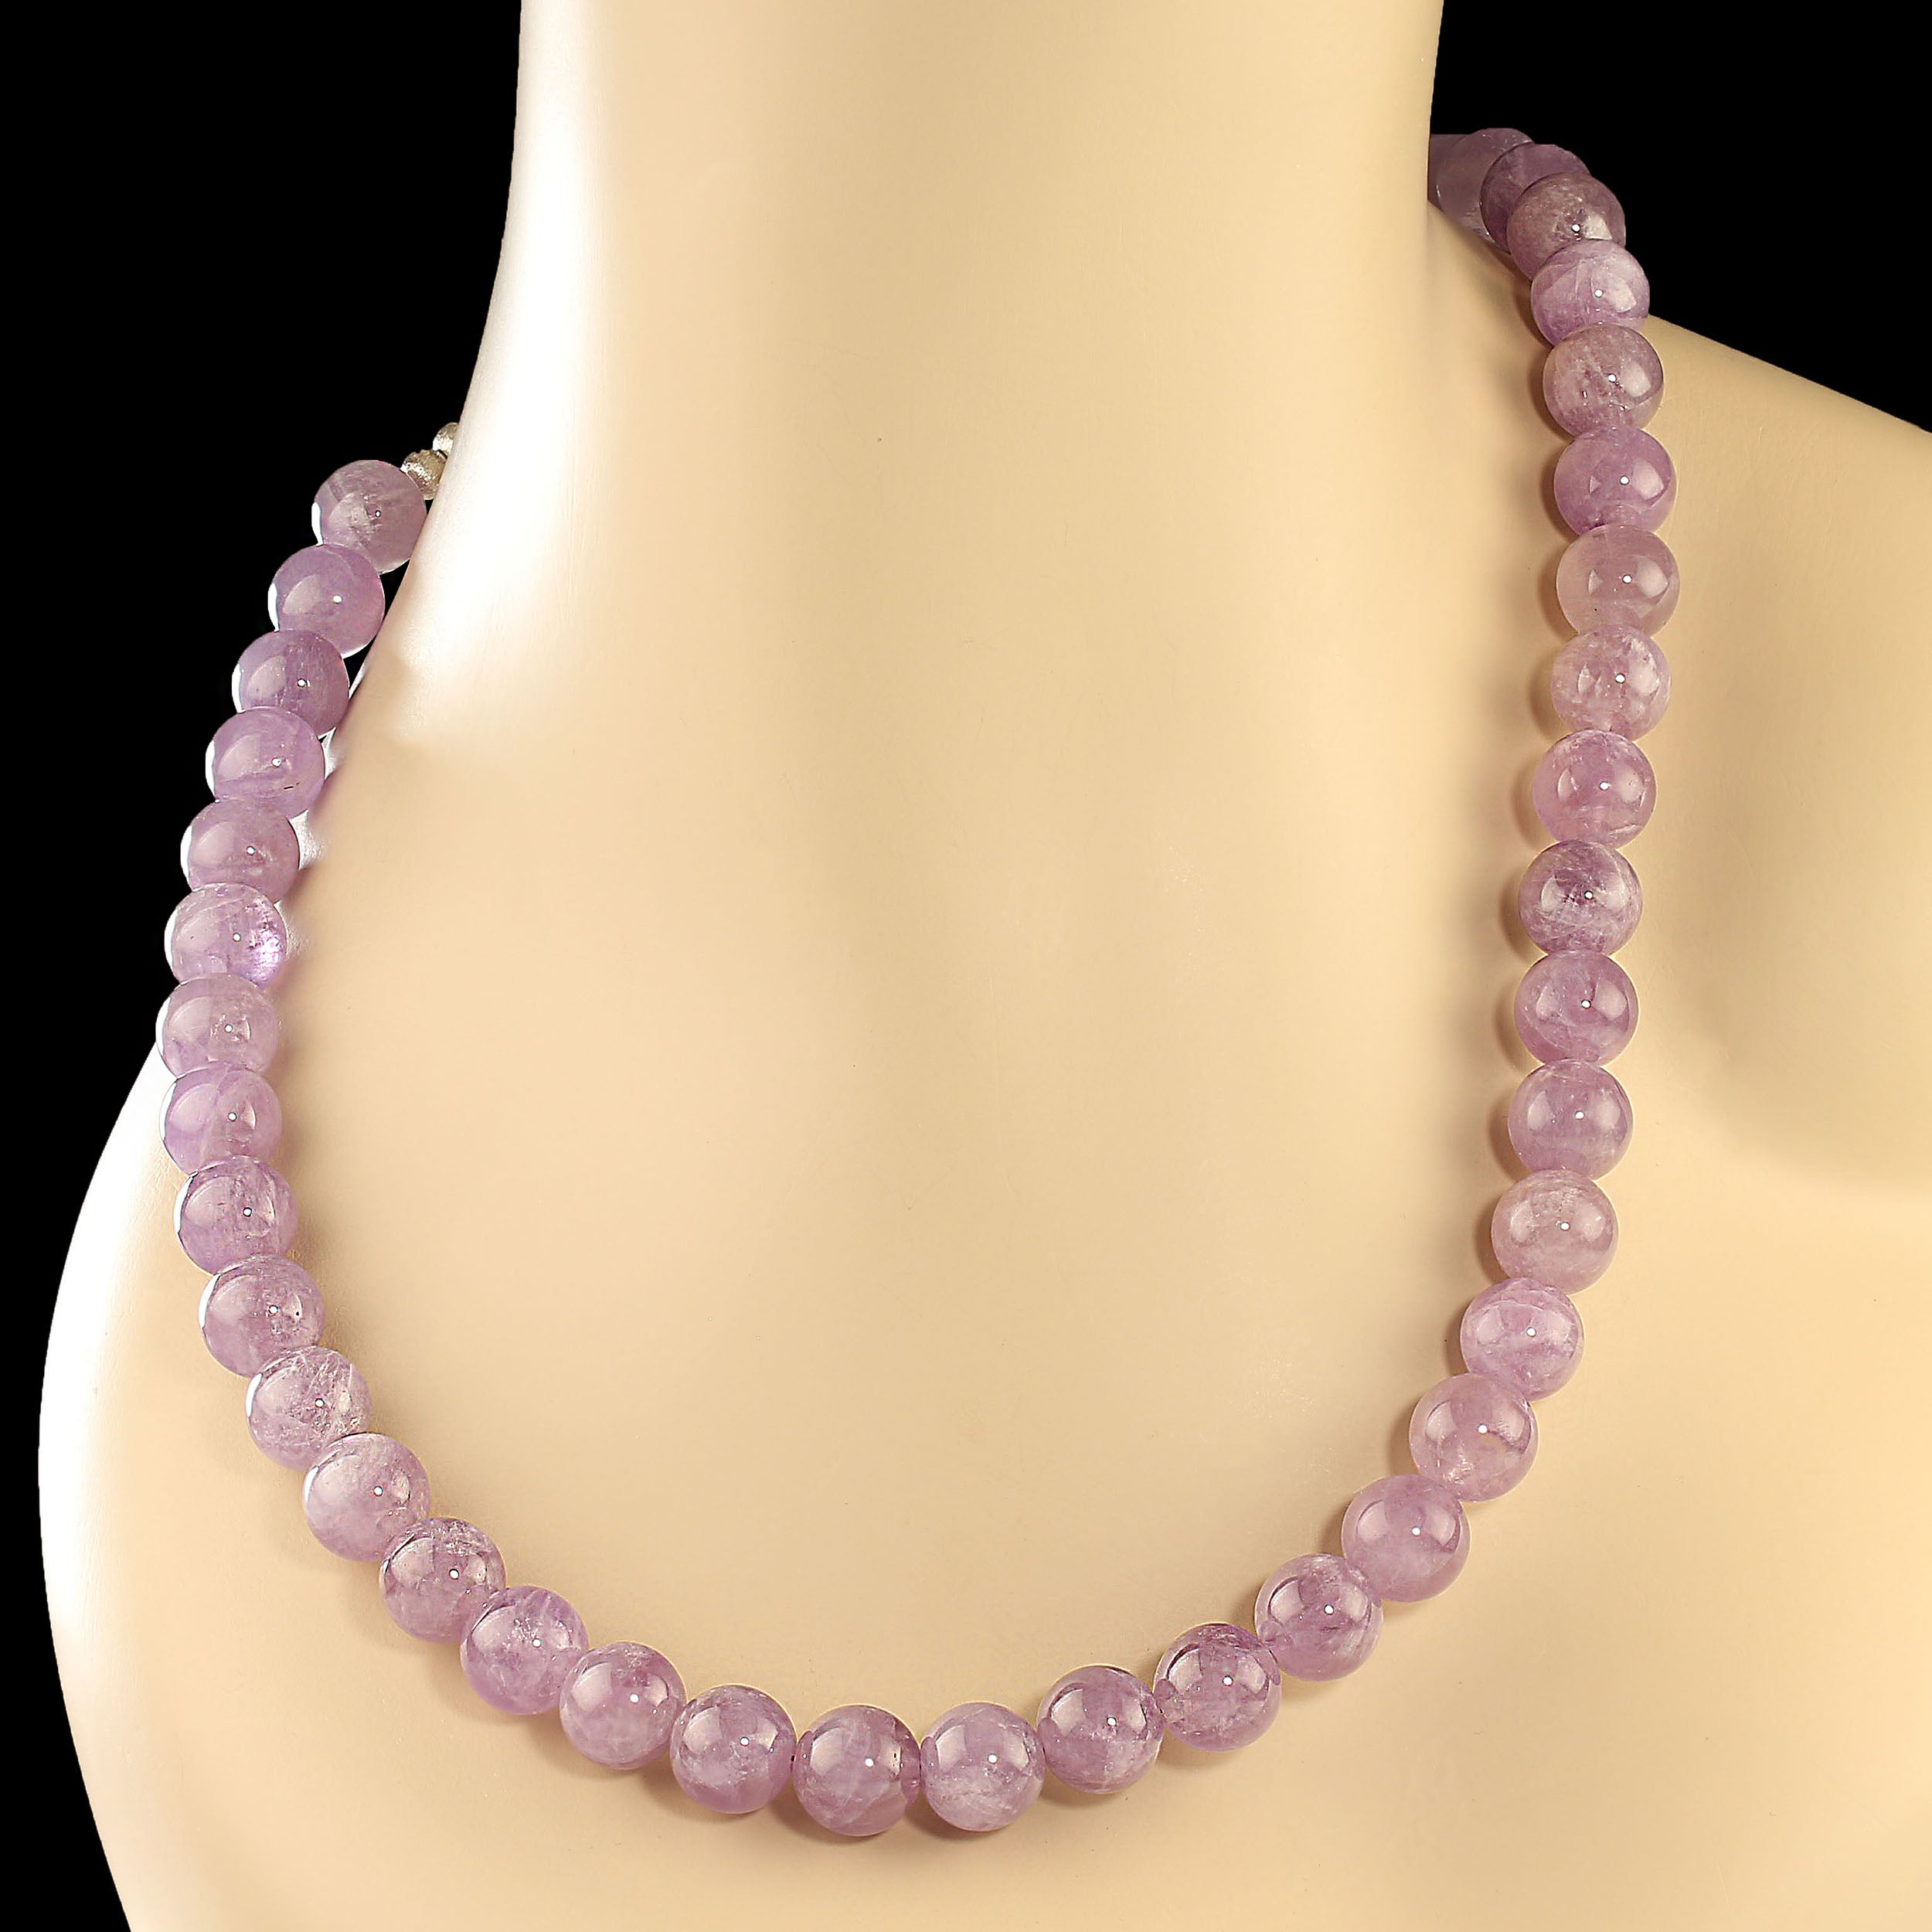 February Birthstone!  What a great gift for the February Baby.  This 25-inch necklace is glowing translucent lilac amethyst.  The necklace is smooth highly polished 12 mm beads. It is secured with a silver plate easy to use 'S' hook.  MN 2408